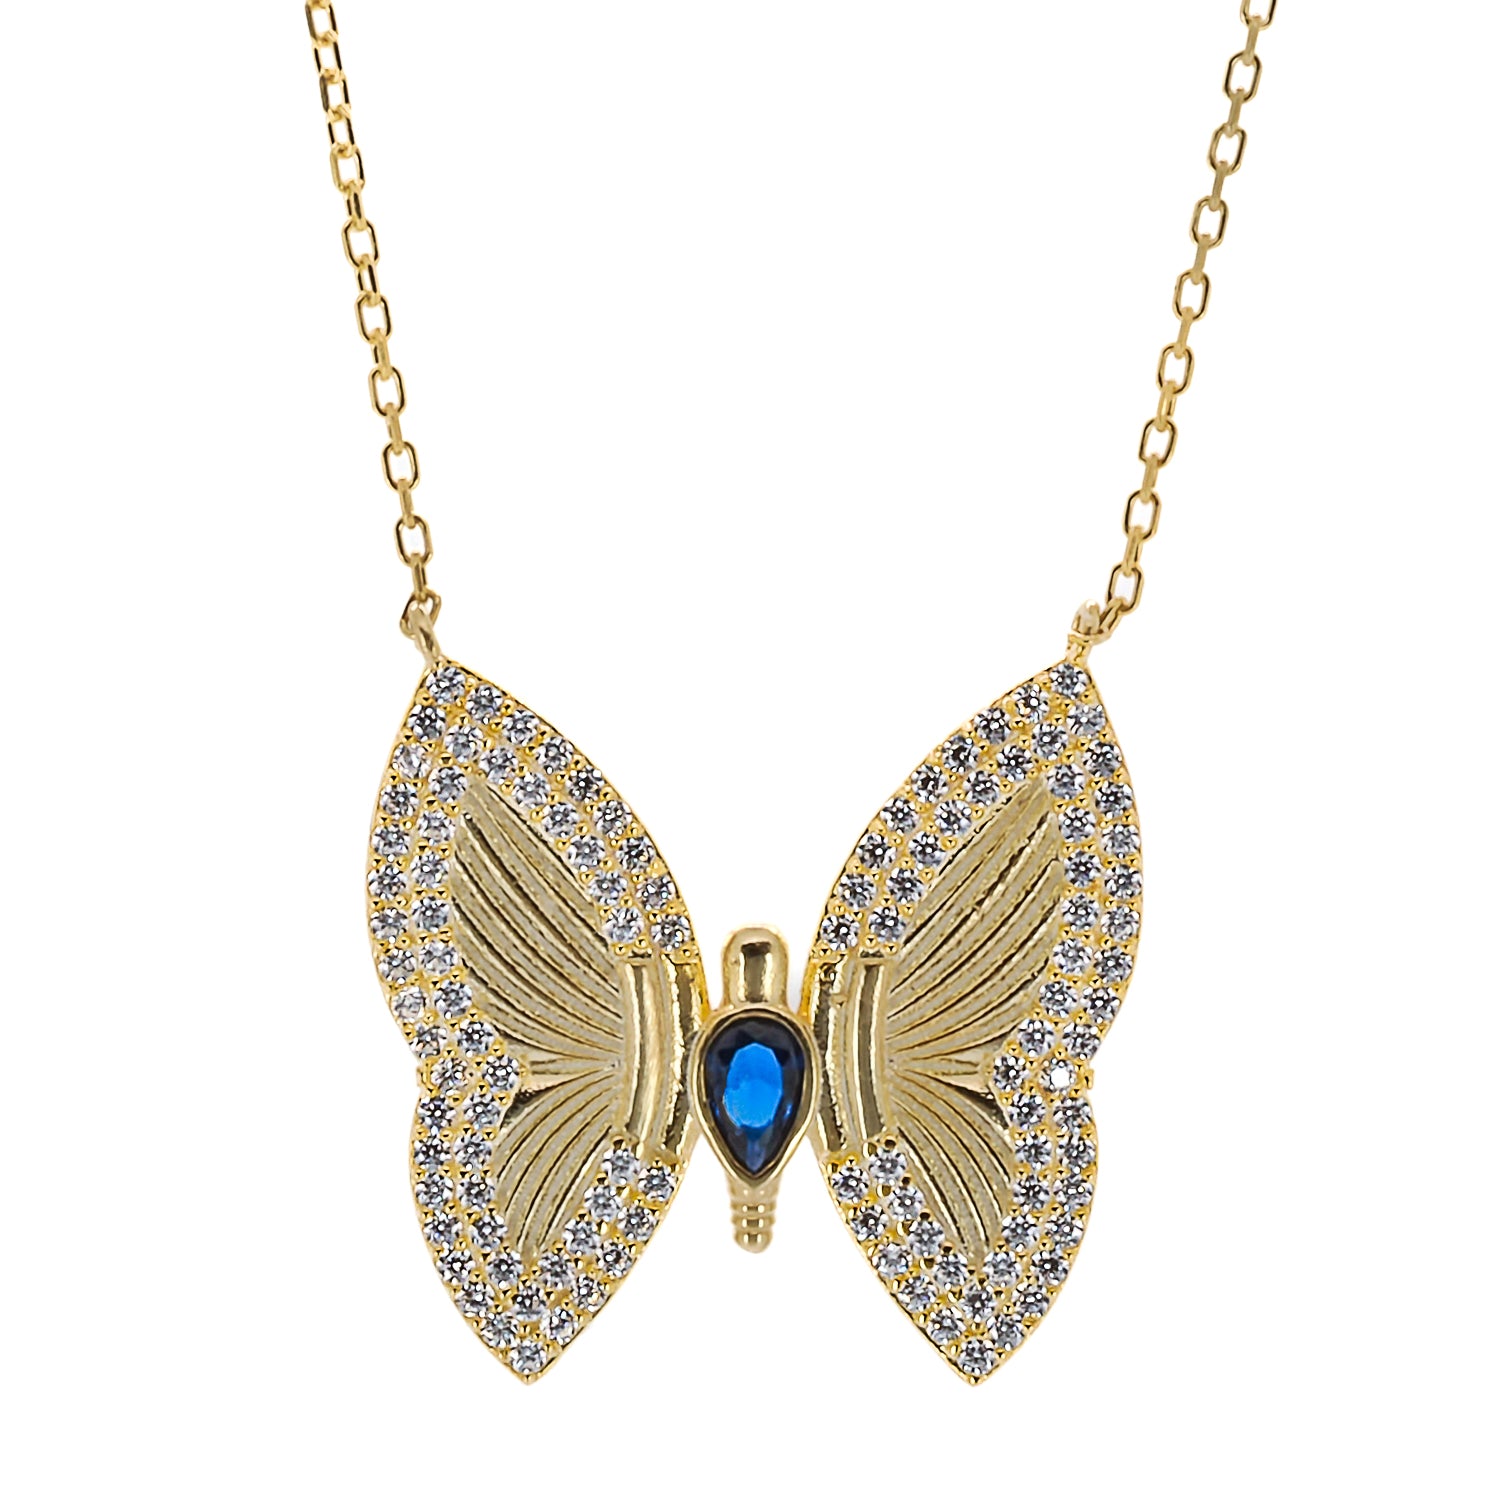 Gold Sparkly Hope Butterfly Necklace featuring a sterling silver chain with an 18K gold plated finish, adorned with a dazzling butterfly pendant embellished with CZ diamonds and a vibrant sapphire stone.